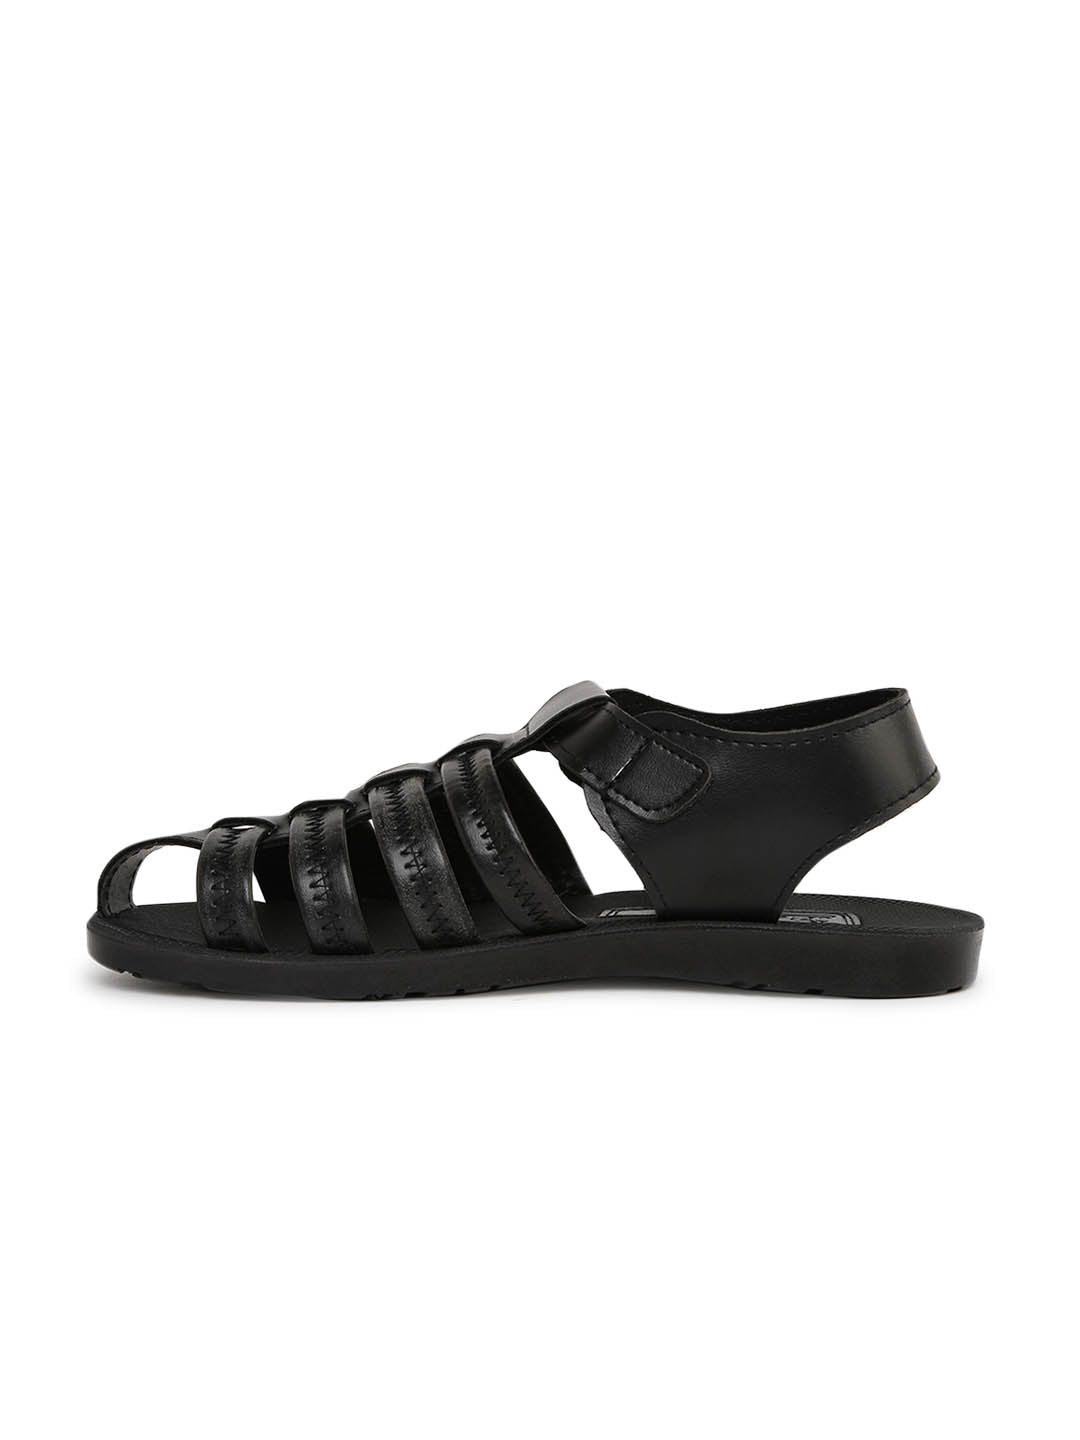 Paragon PU8985G Men Stylish Sandals | Comfortable Sandals for Daily Outdoor Use | Casual Formal Sandals with Cushioned Soles